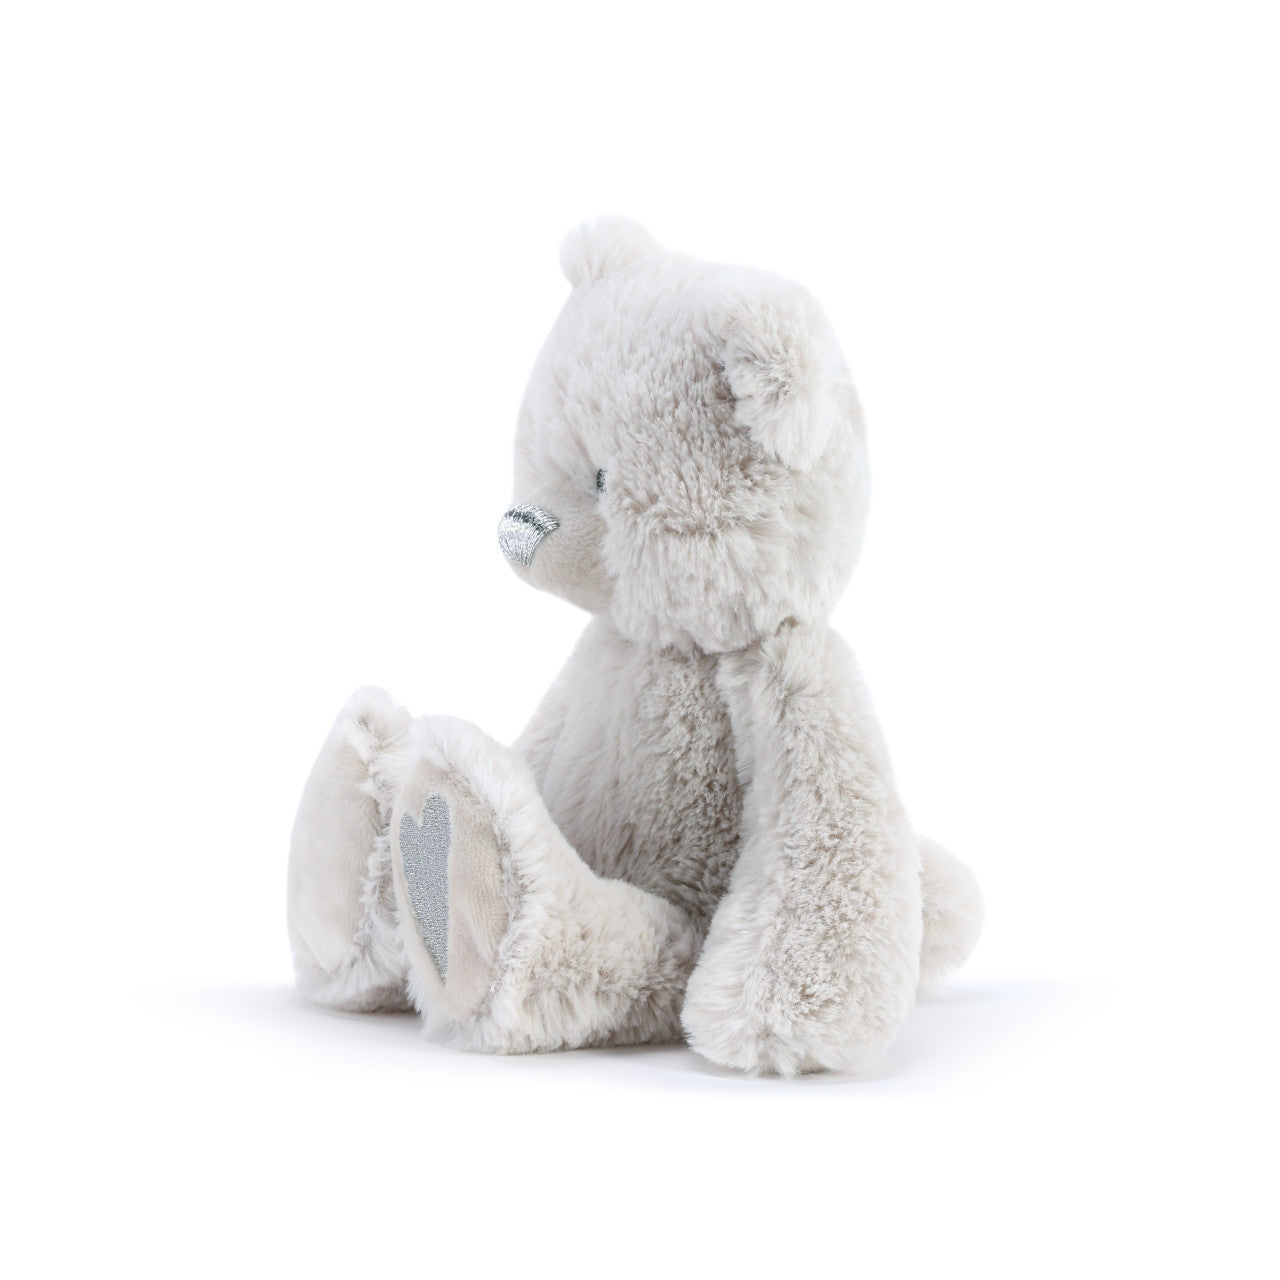 Demdaco April Birthstone Bear available at The Good Life Boutique